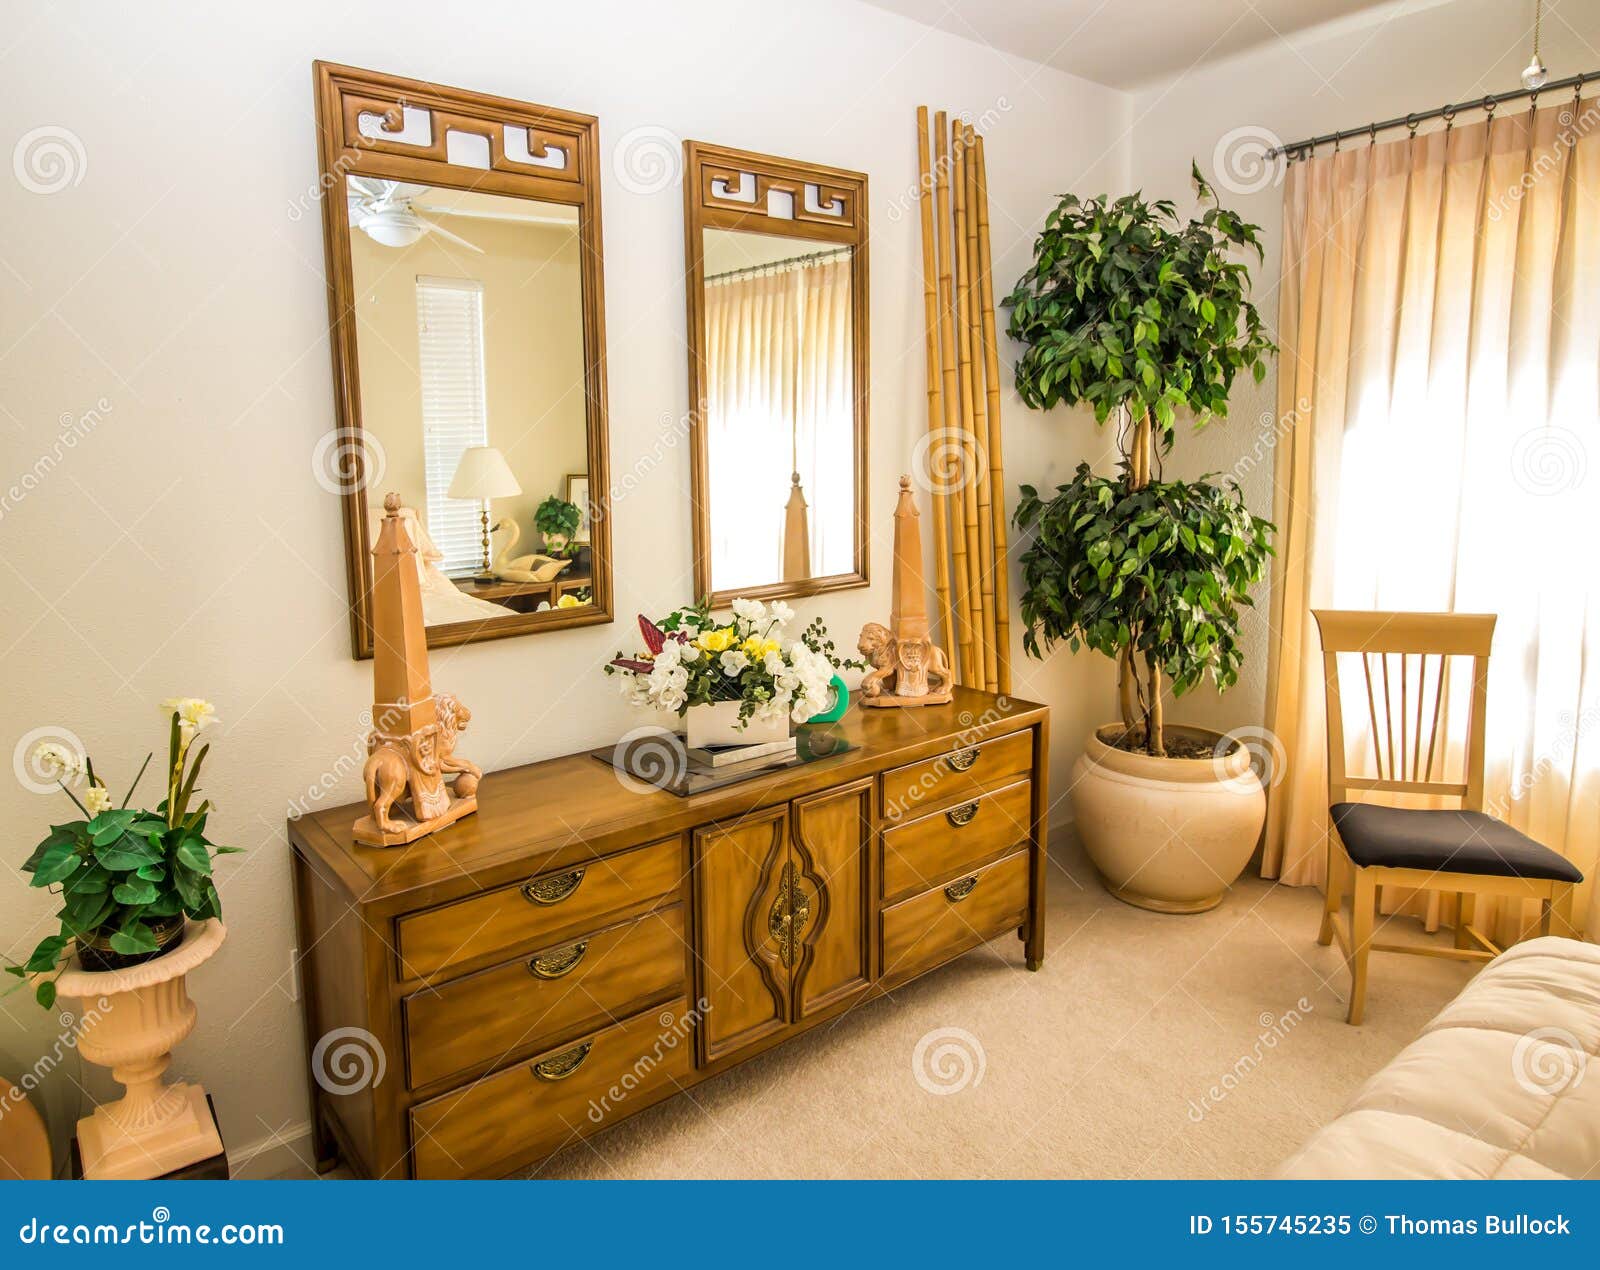 Wooden Dresser And Mirrors In Modern Bedroom Stock Image Image